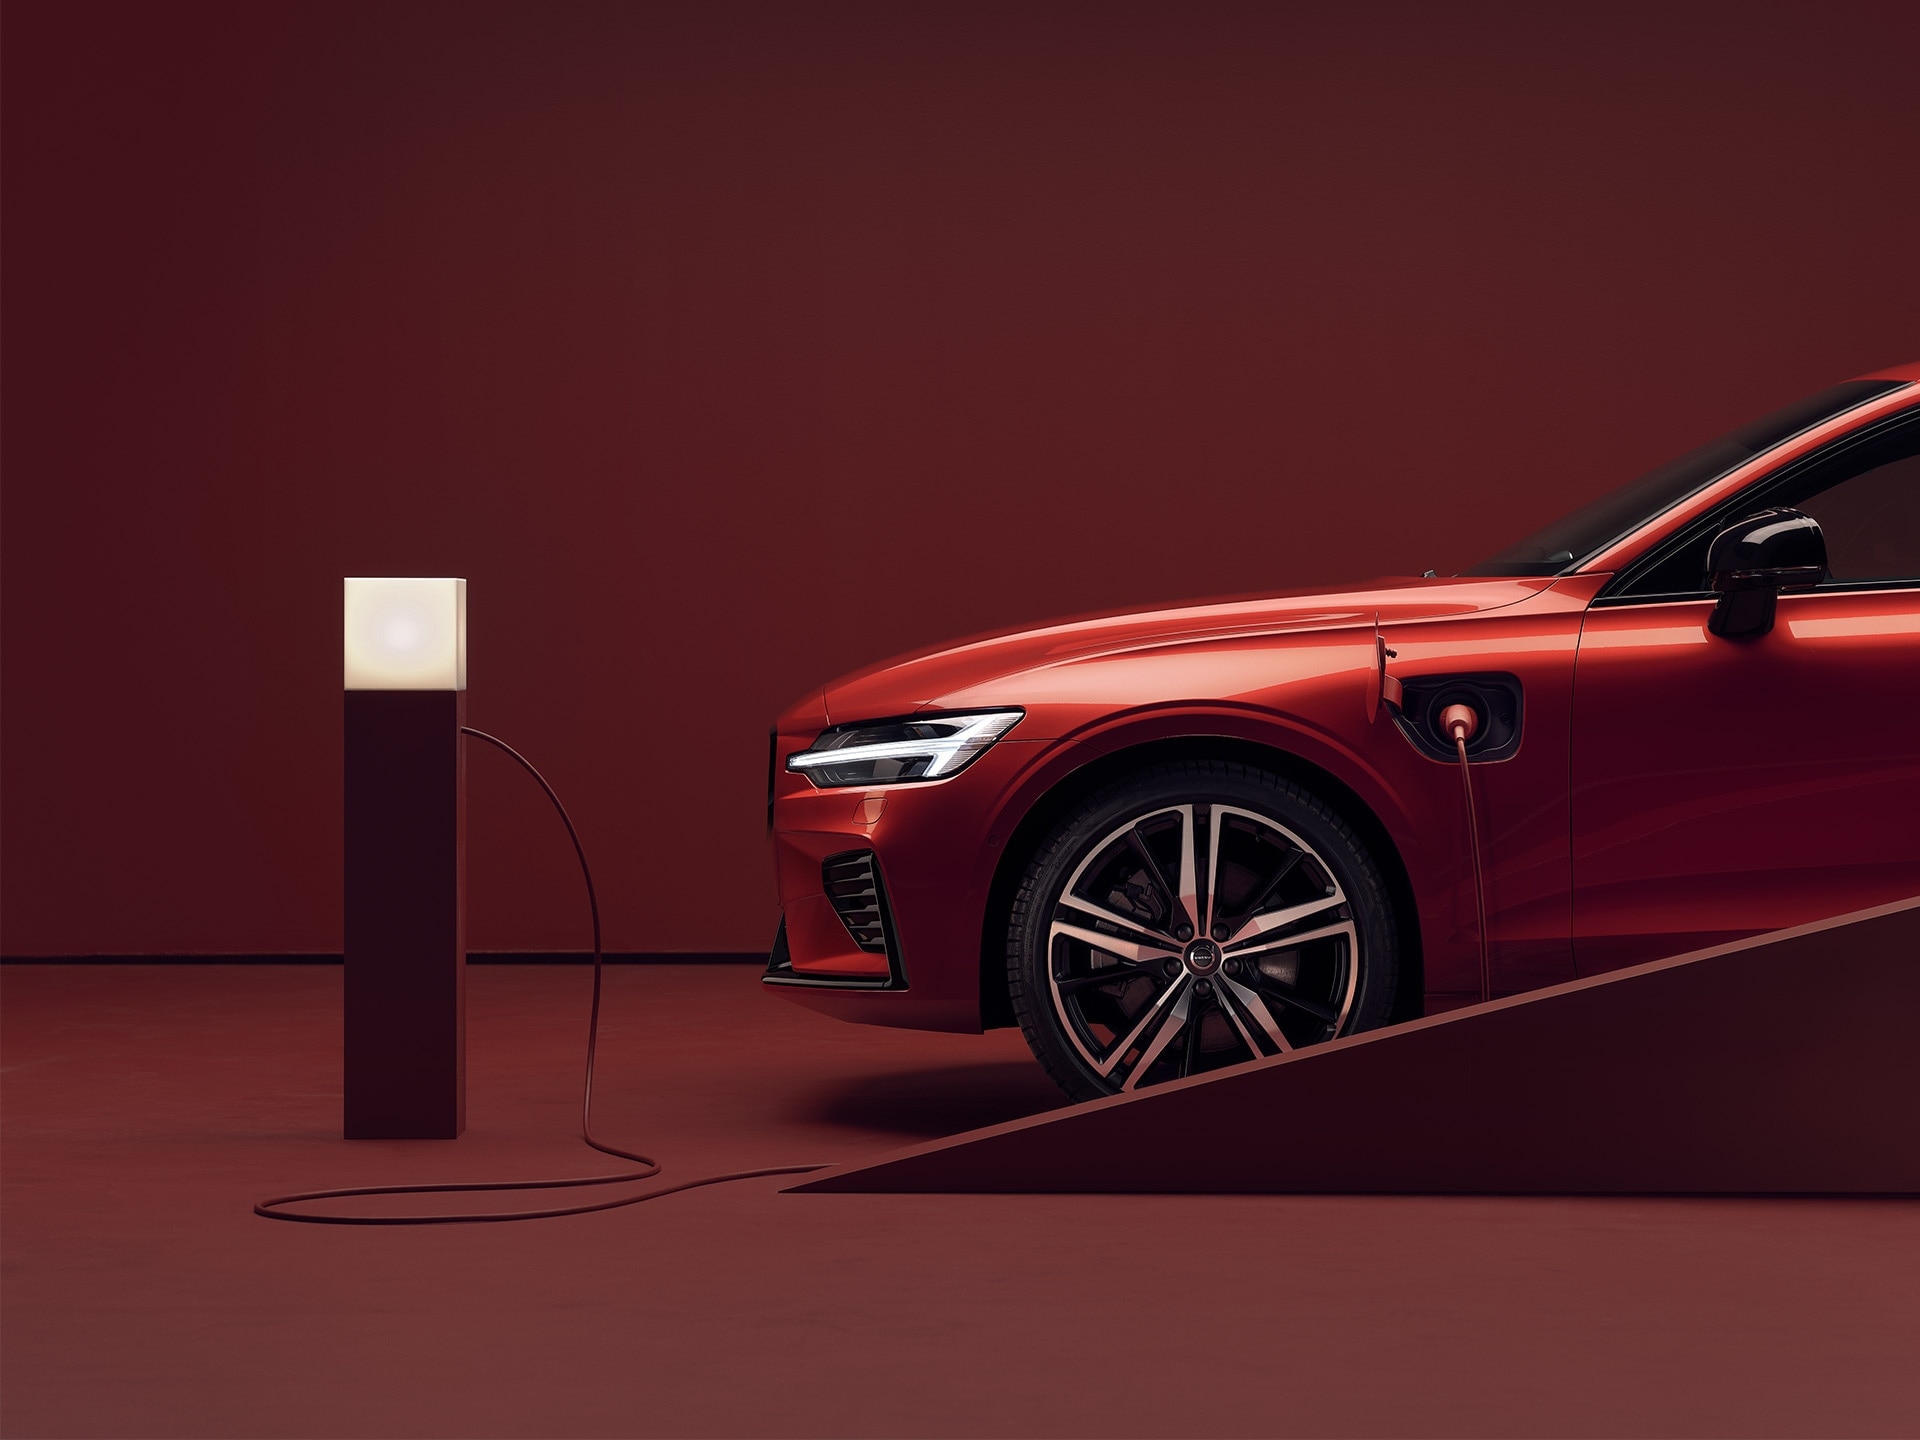 A parked red Volvo sedan is plugged into a charging point